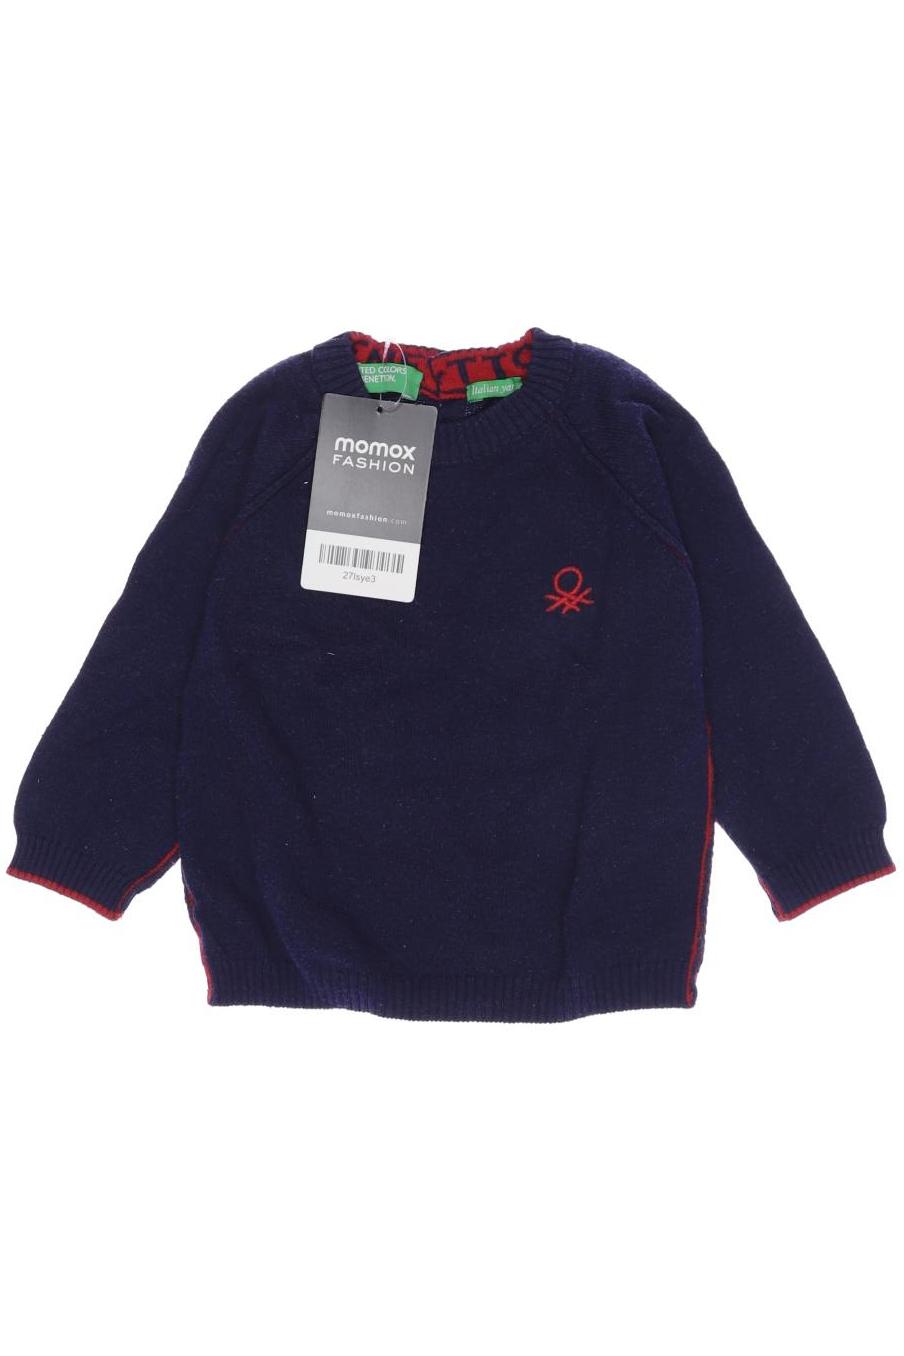 UNITED COLORS OF BENETTON Jungen Pullover, marineblau von United Colors of Benetton